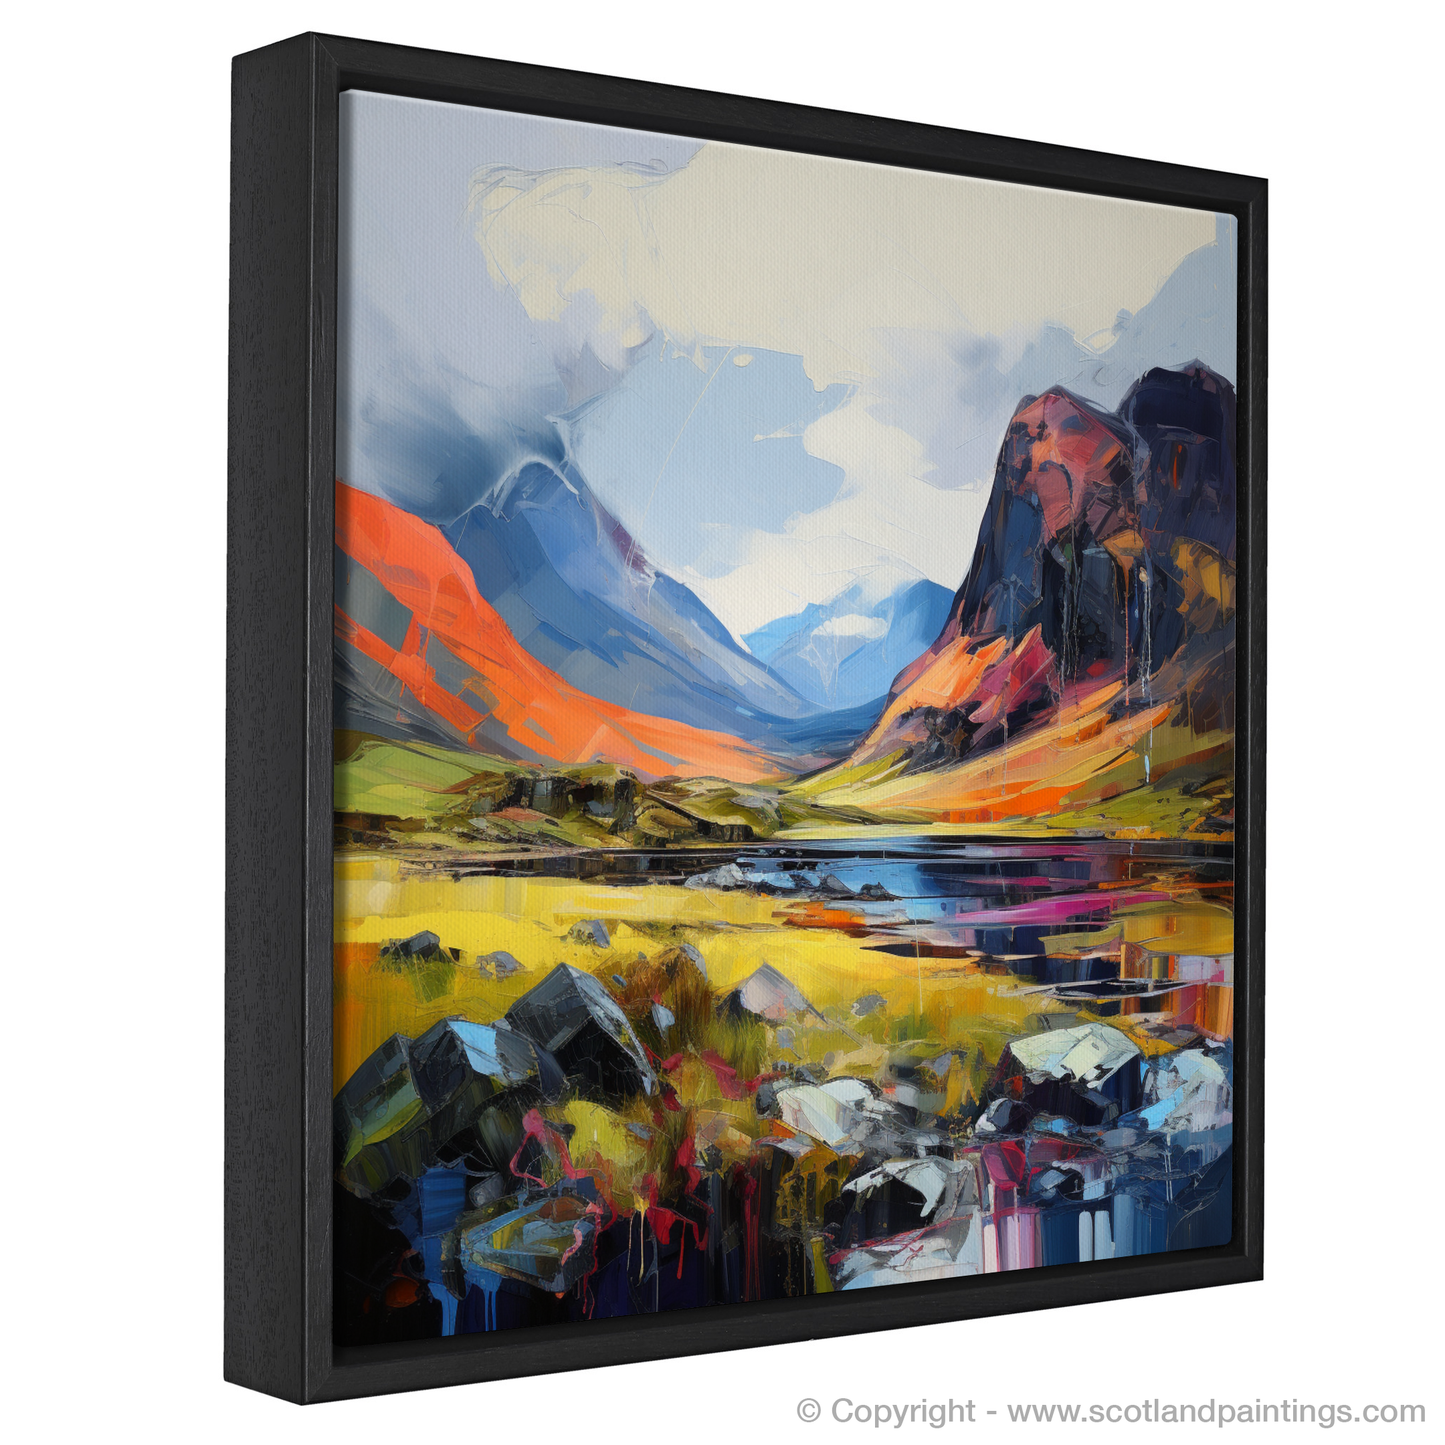 Painting and Art Print of Creag Leacach. Creag Leacach: An Expressionist Ode to the Scottish Highlands.